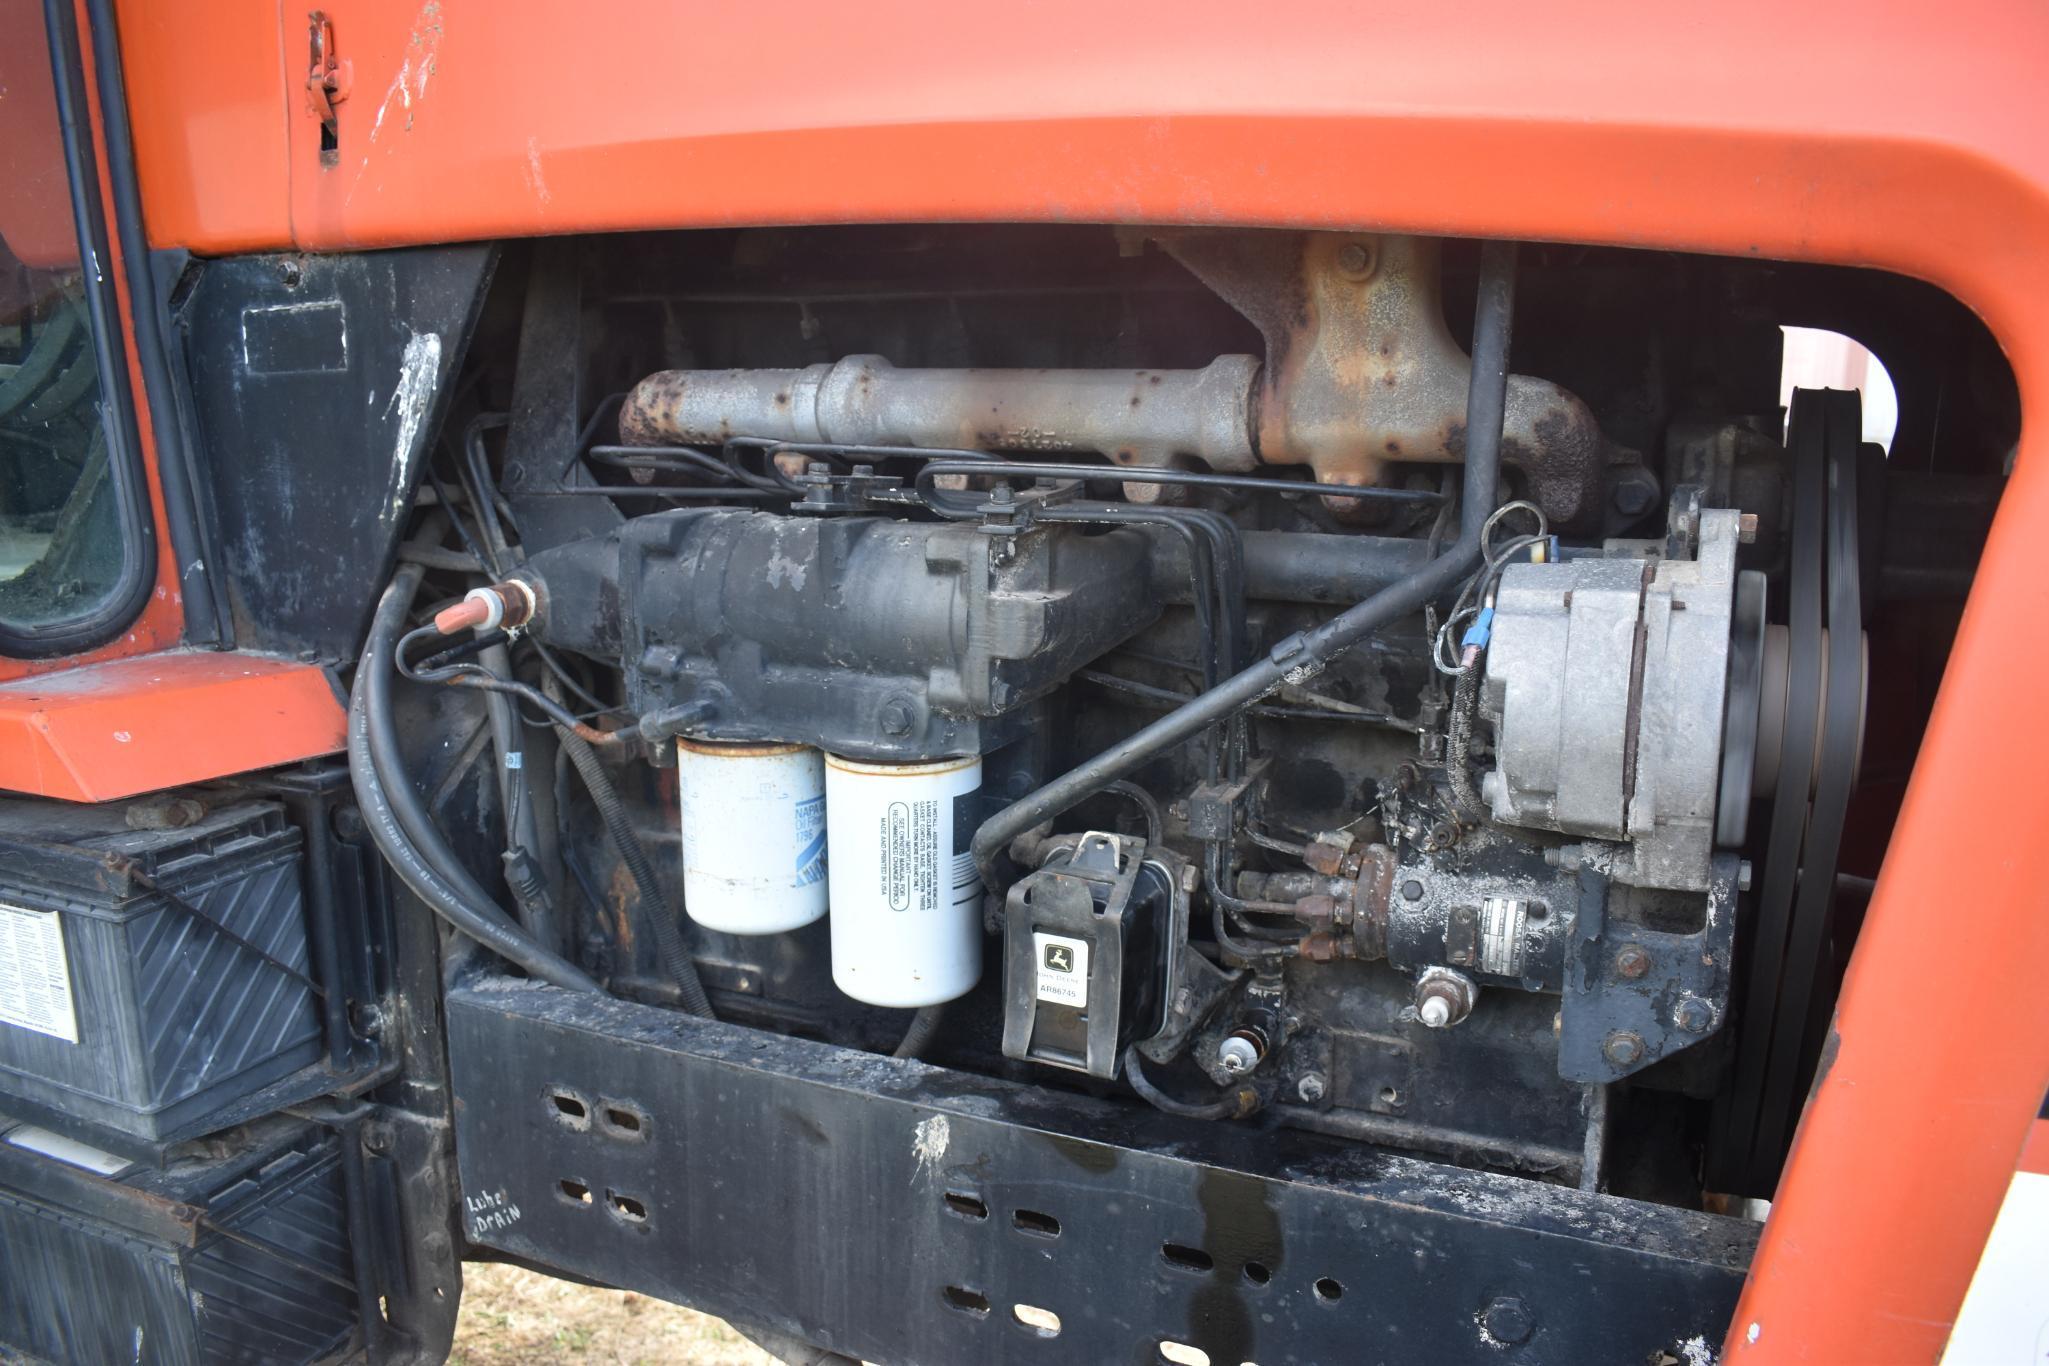 1979 Allis-Chalmers 7060 2wd tractor